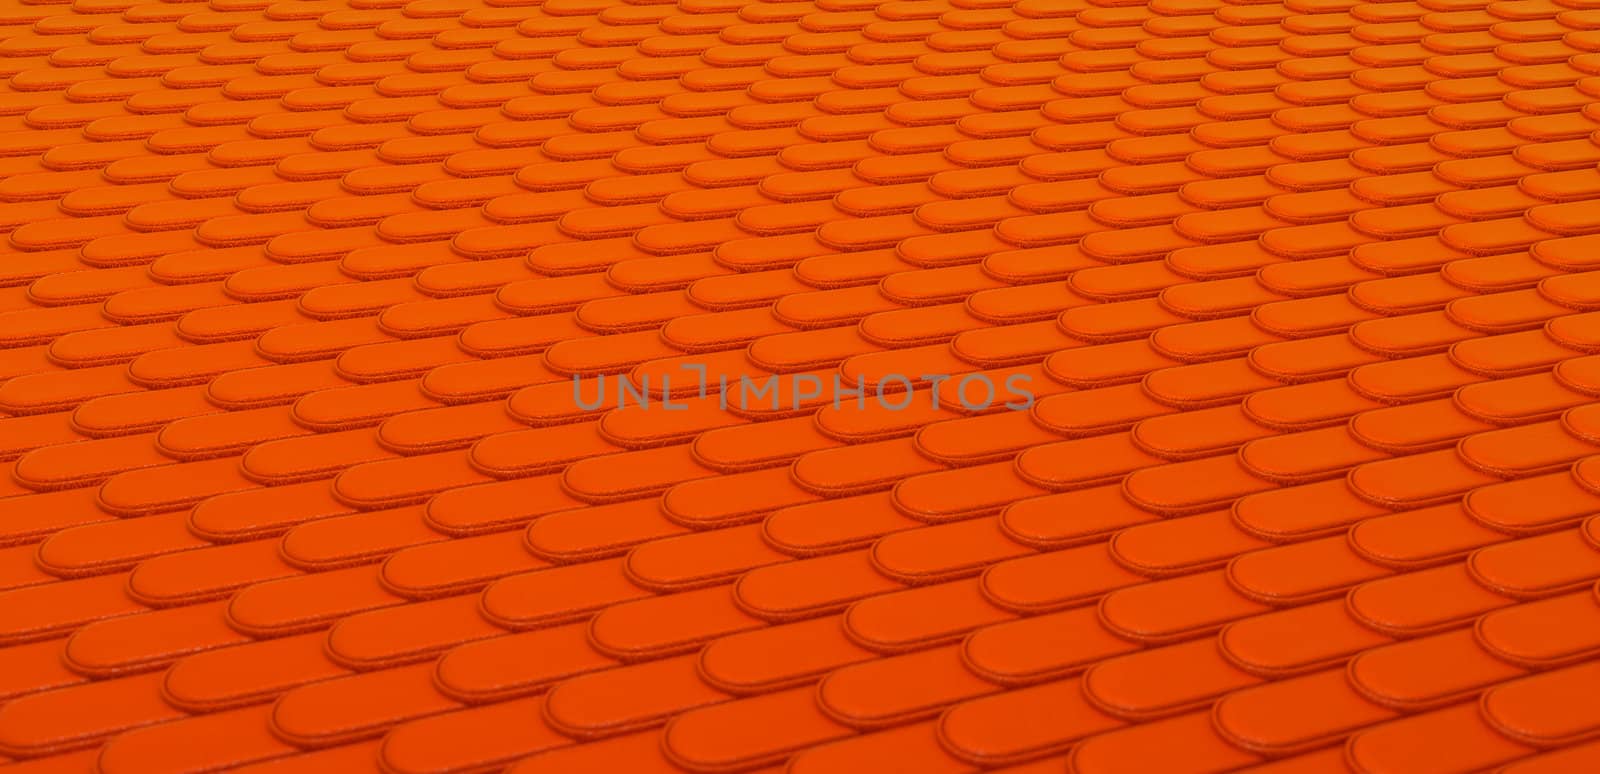 Orange Leather stitched background with scales texture. Large resolution